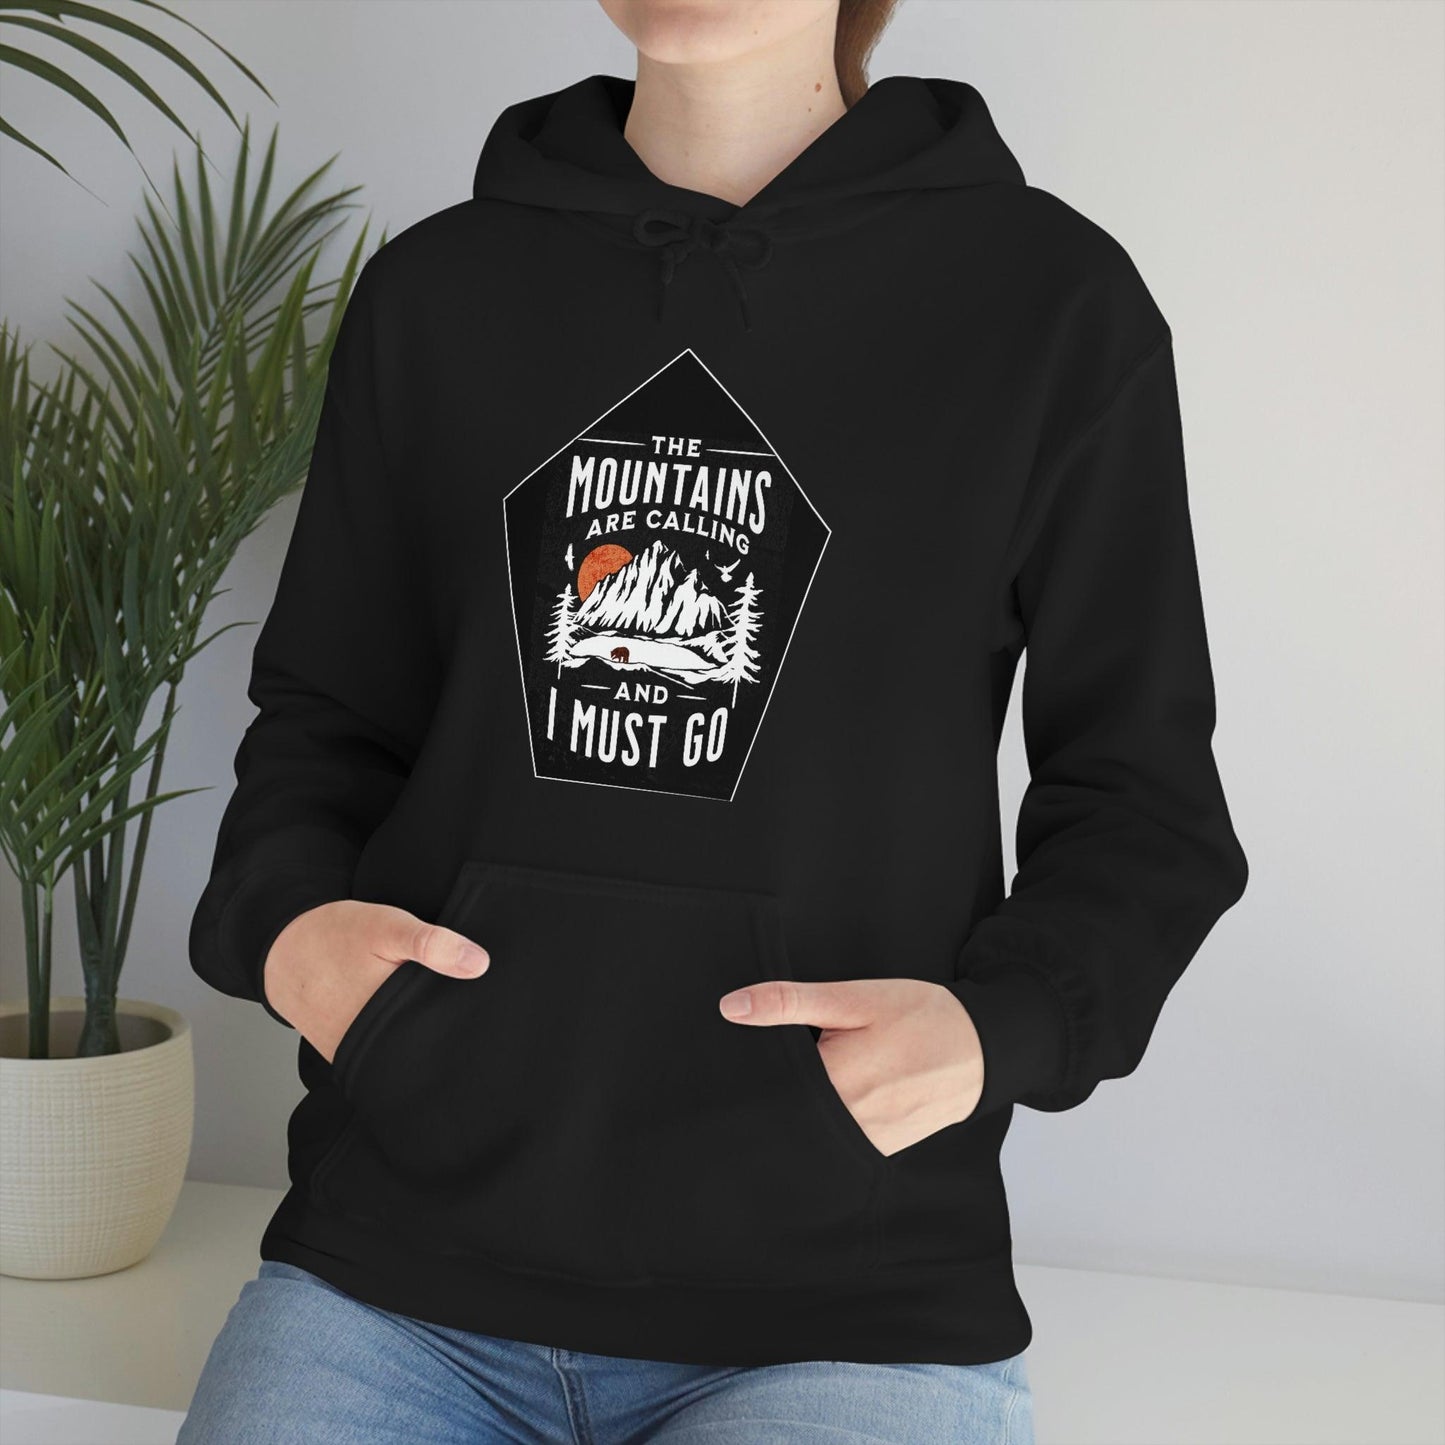 The Mountains are Calling and I Must Go, Hooded Sweatshirt